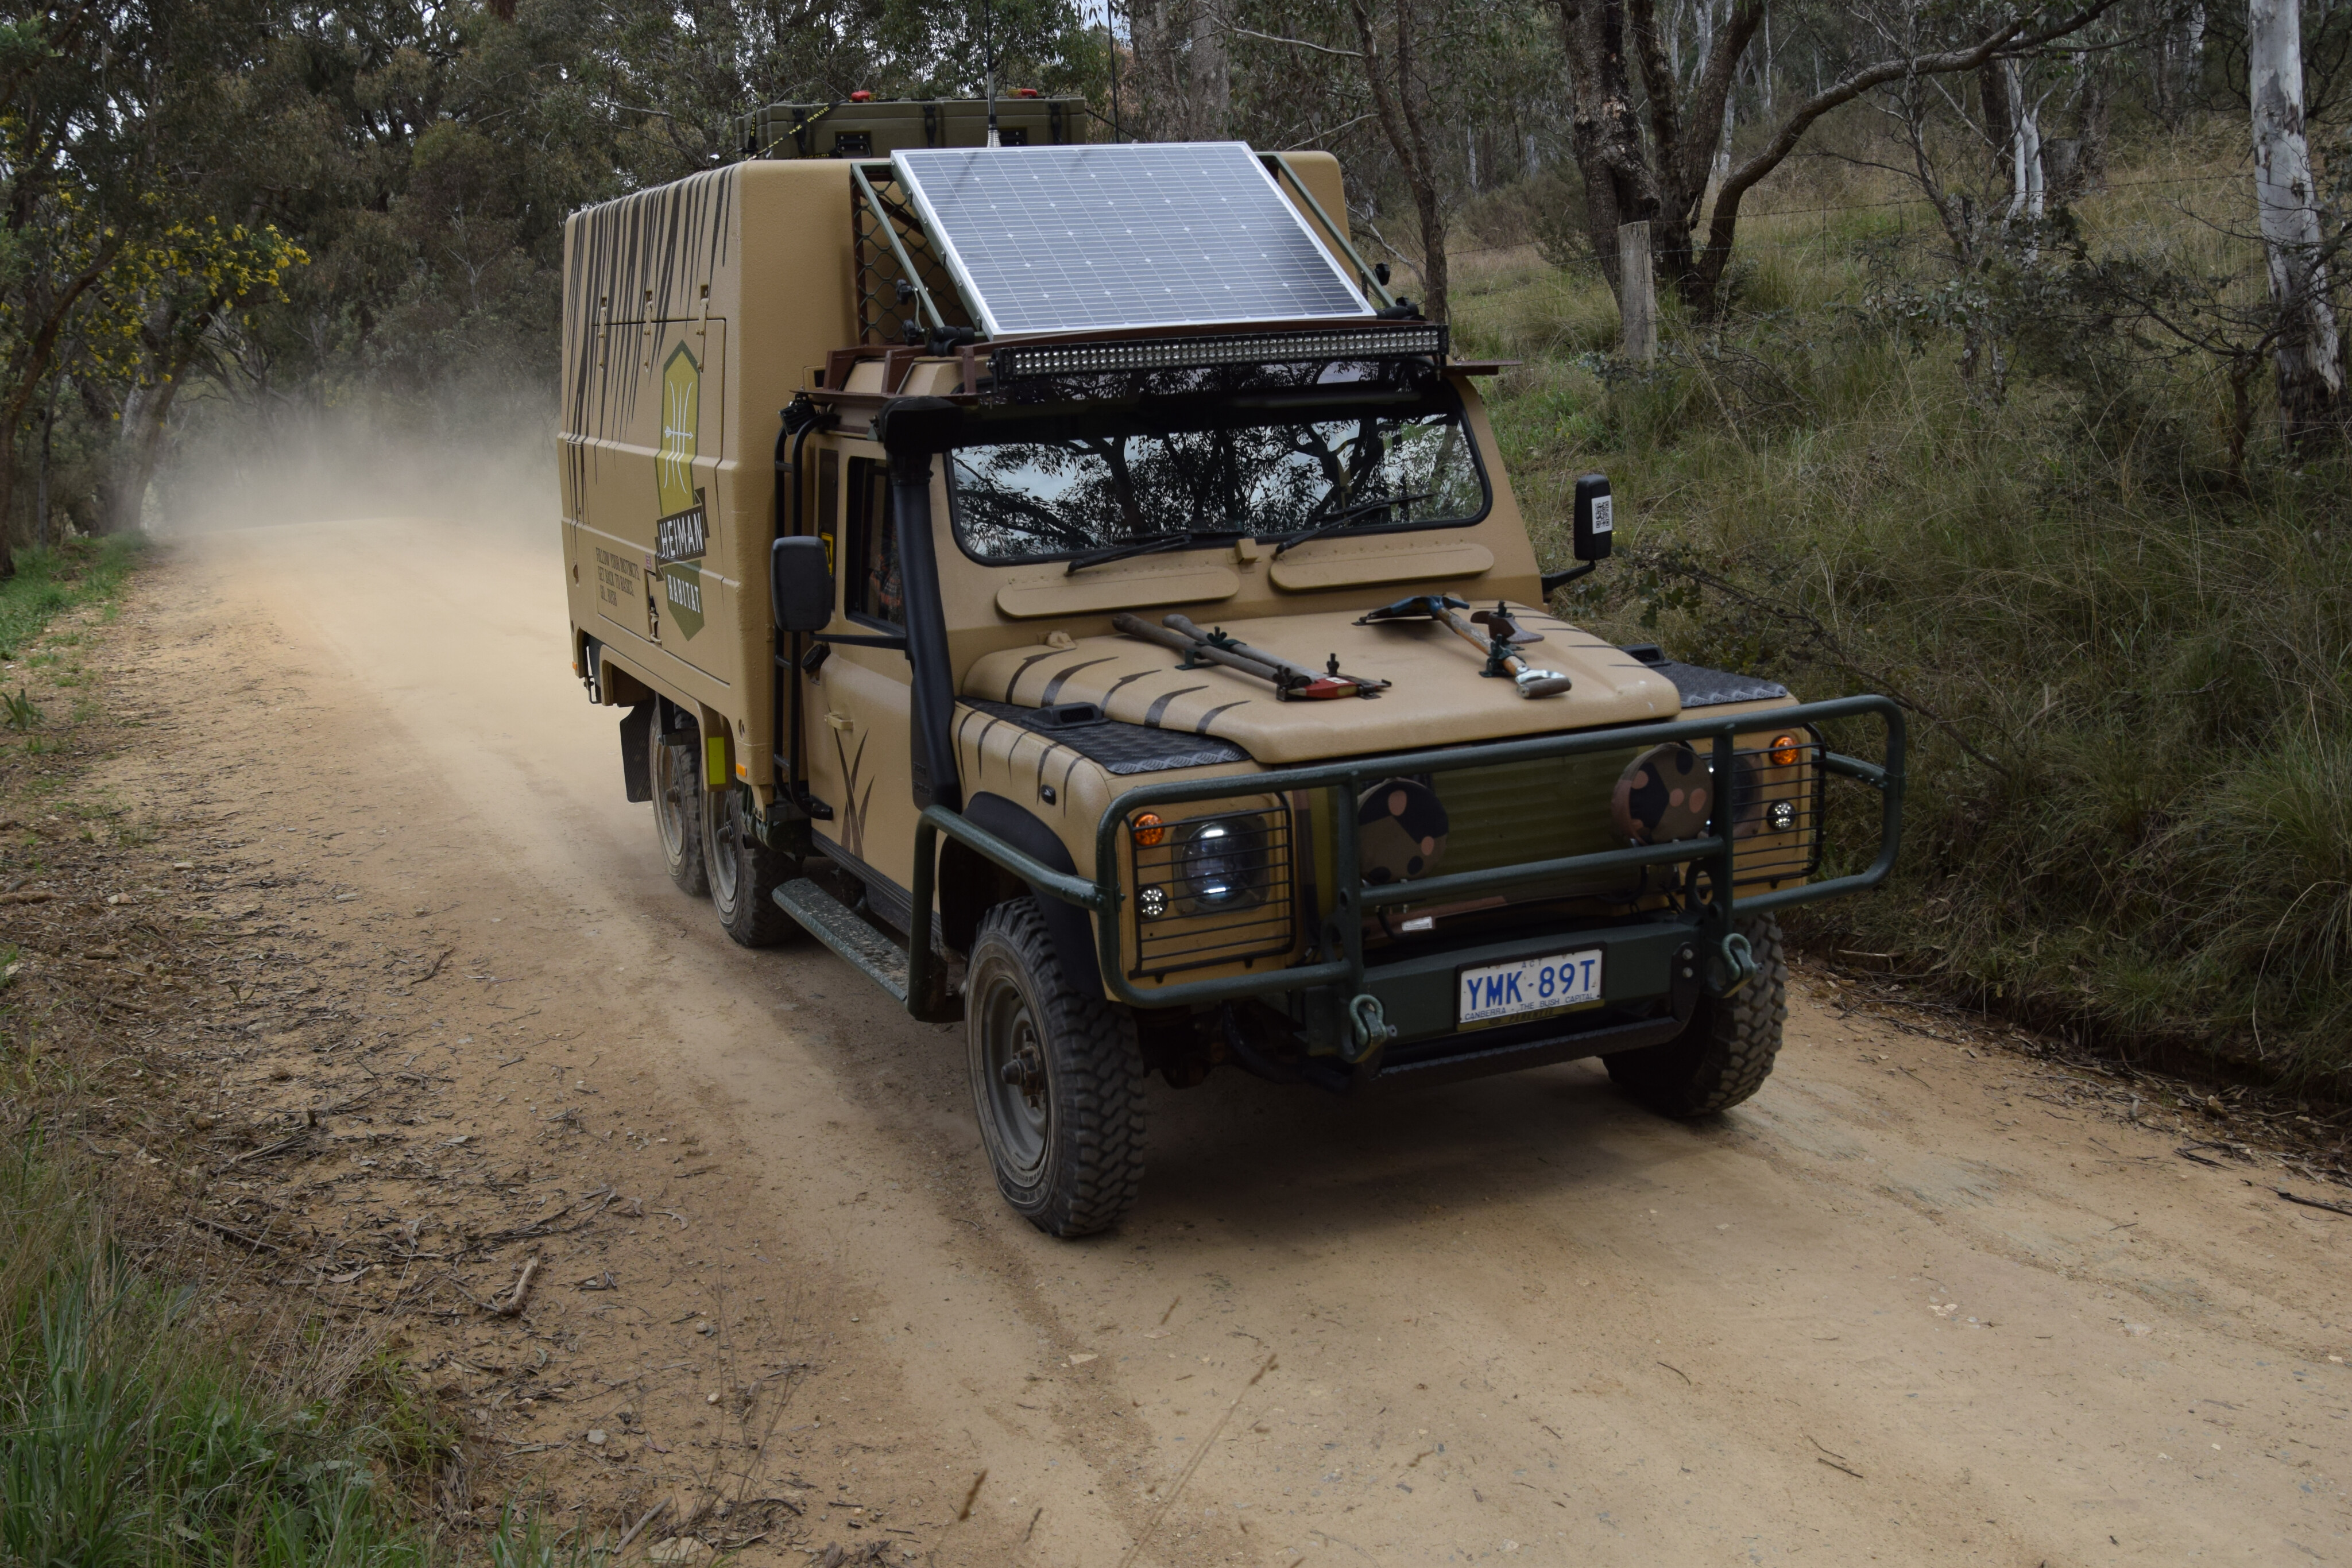 05a724b4/land rover 110 perentie 6x6 gmv the 6t light ridged rig likes to cruise at 80kph JPG